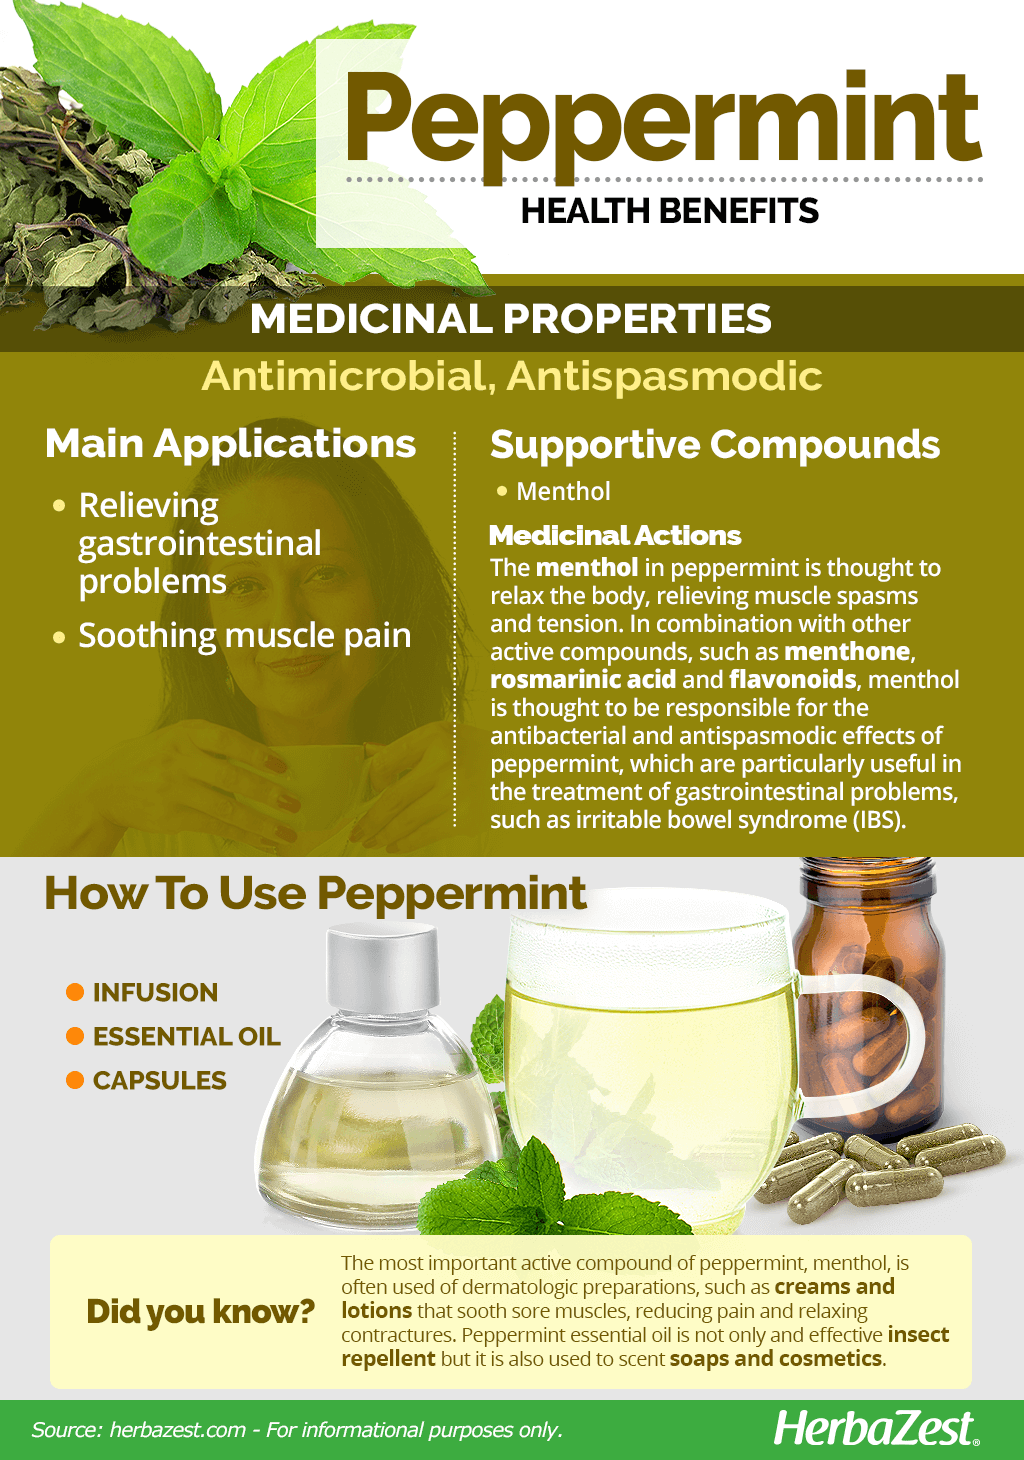 All About Peppermint